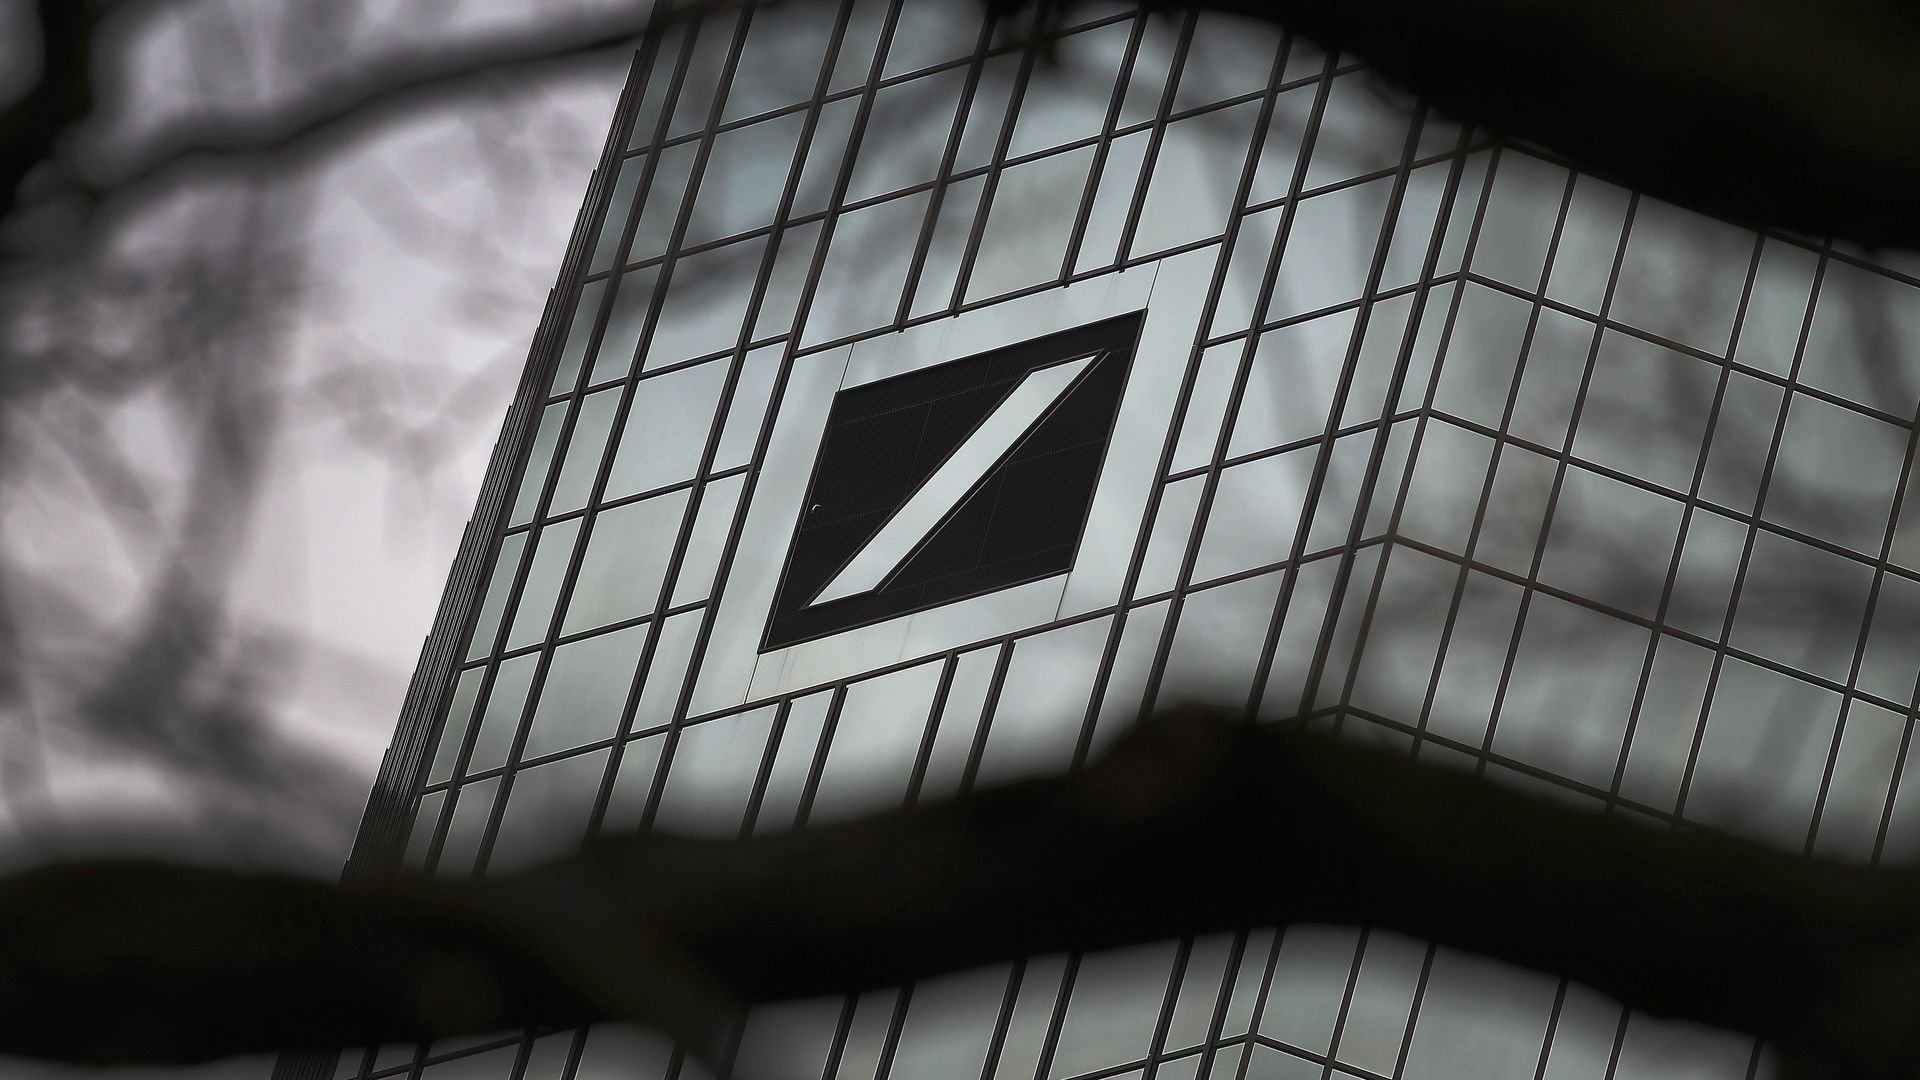 Deutsche Bank to pay $75 million to settle lawsuit from Jeffrey Epstein's accusers